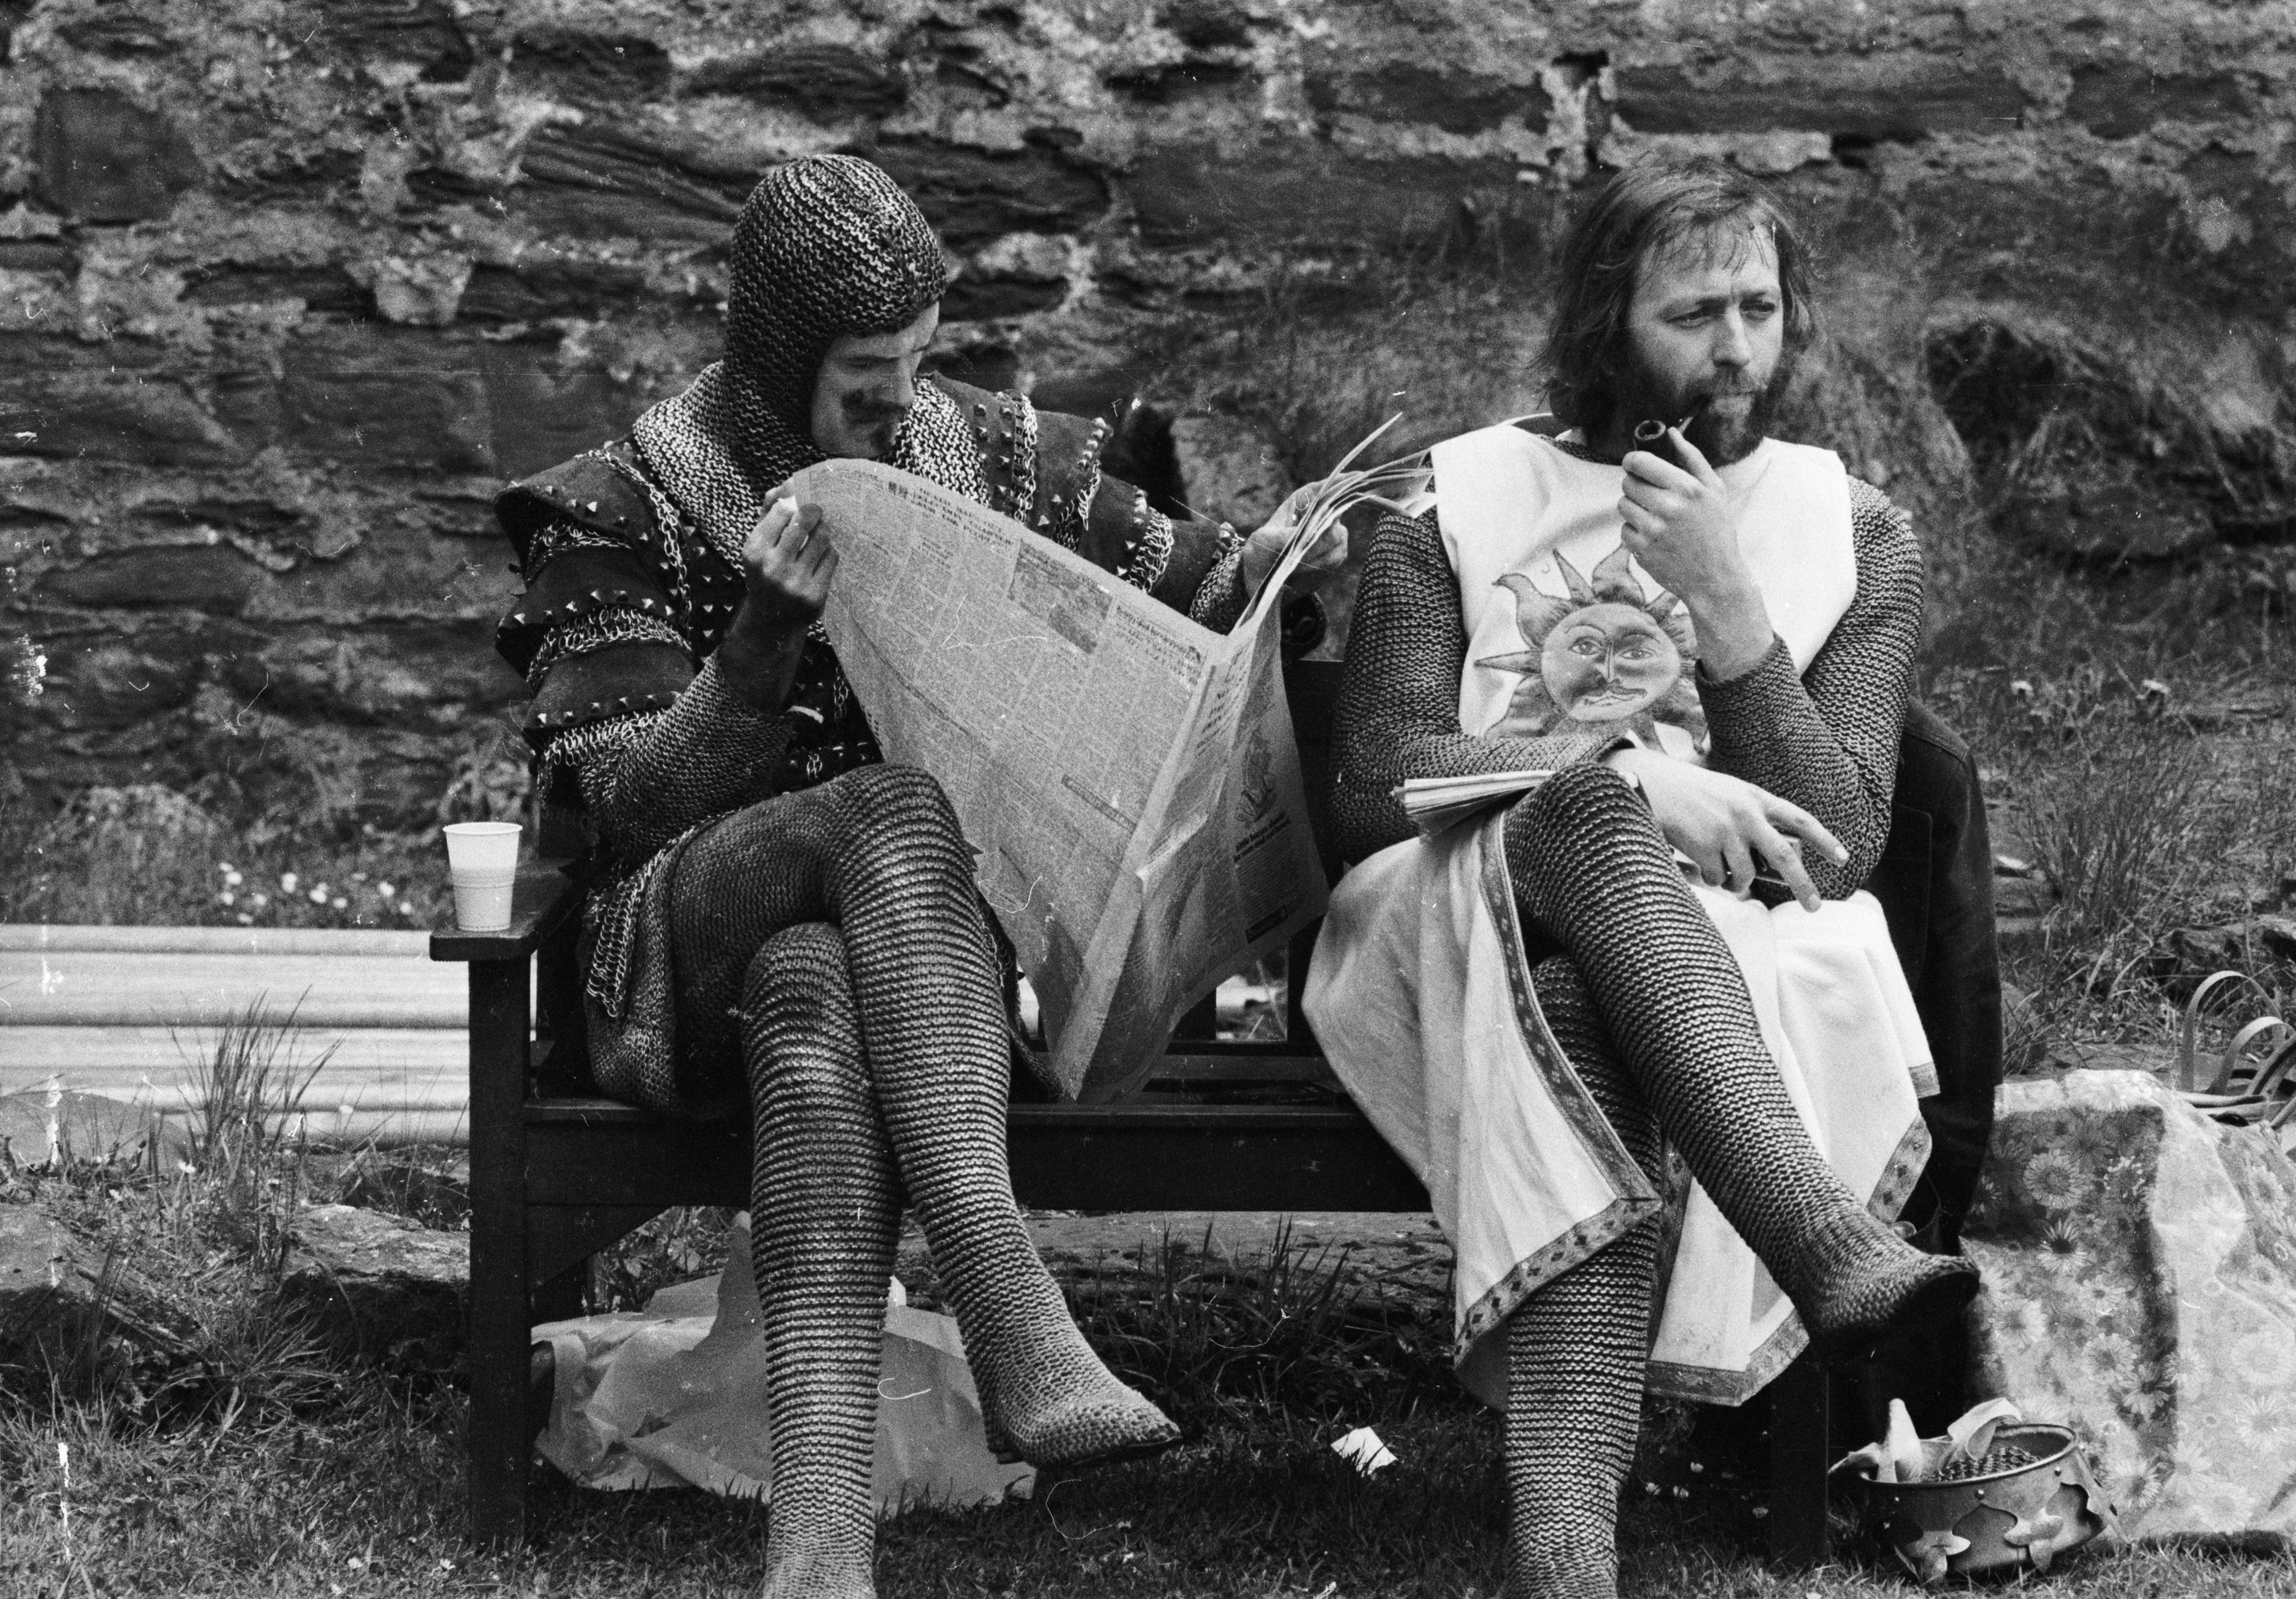 Still of John Cleese, Graham Chapman and Michael Palin in Monty Python and the Holy Grail (1975)